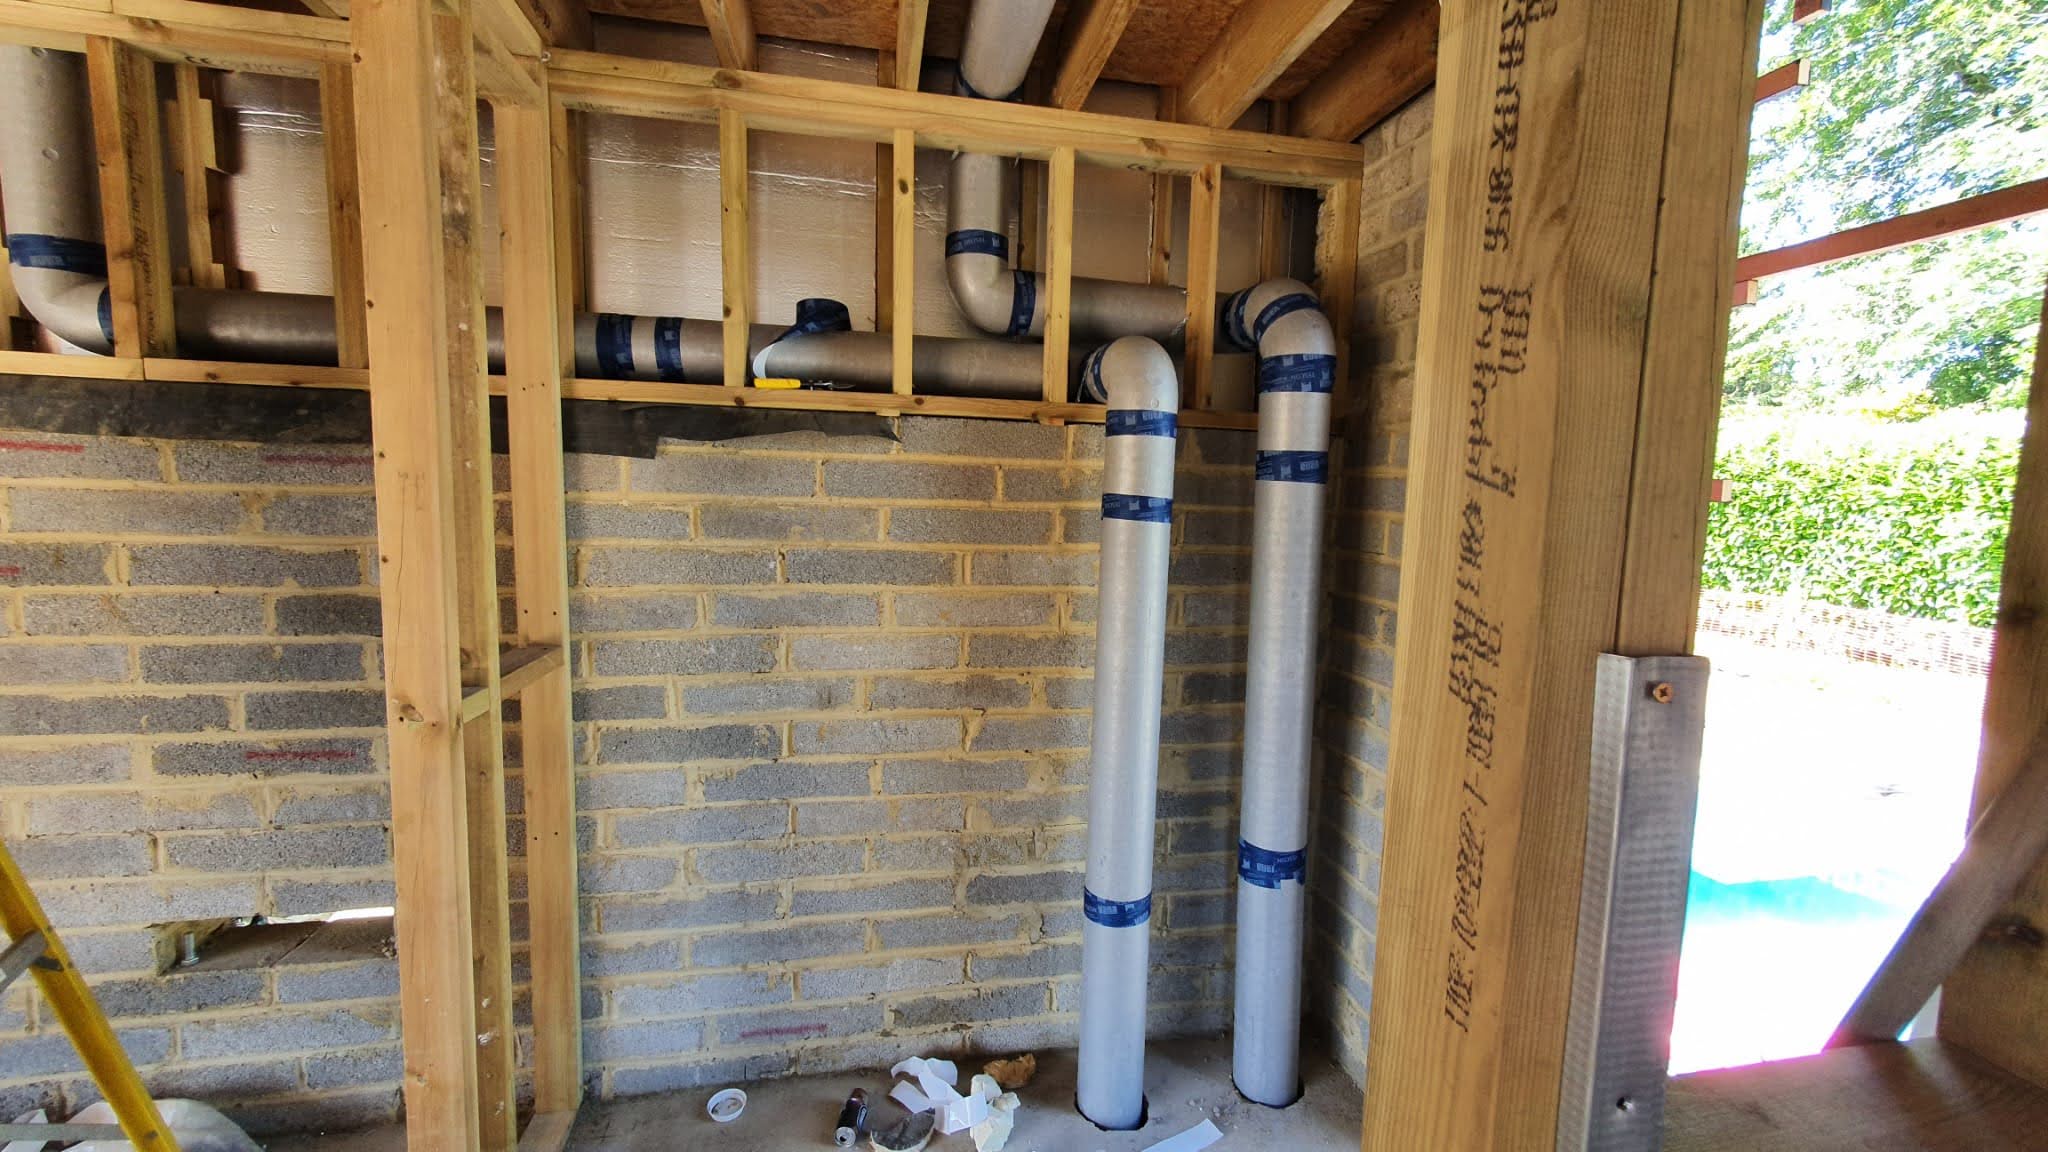 Preinsulated ducting running from basement to roof behind fitted wardrobe frame